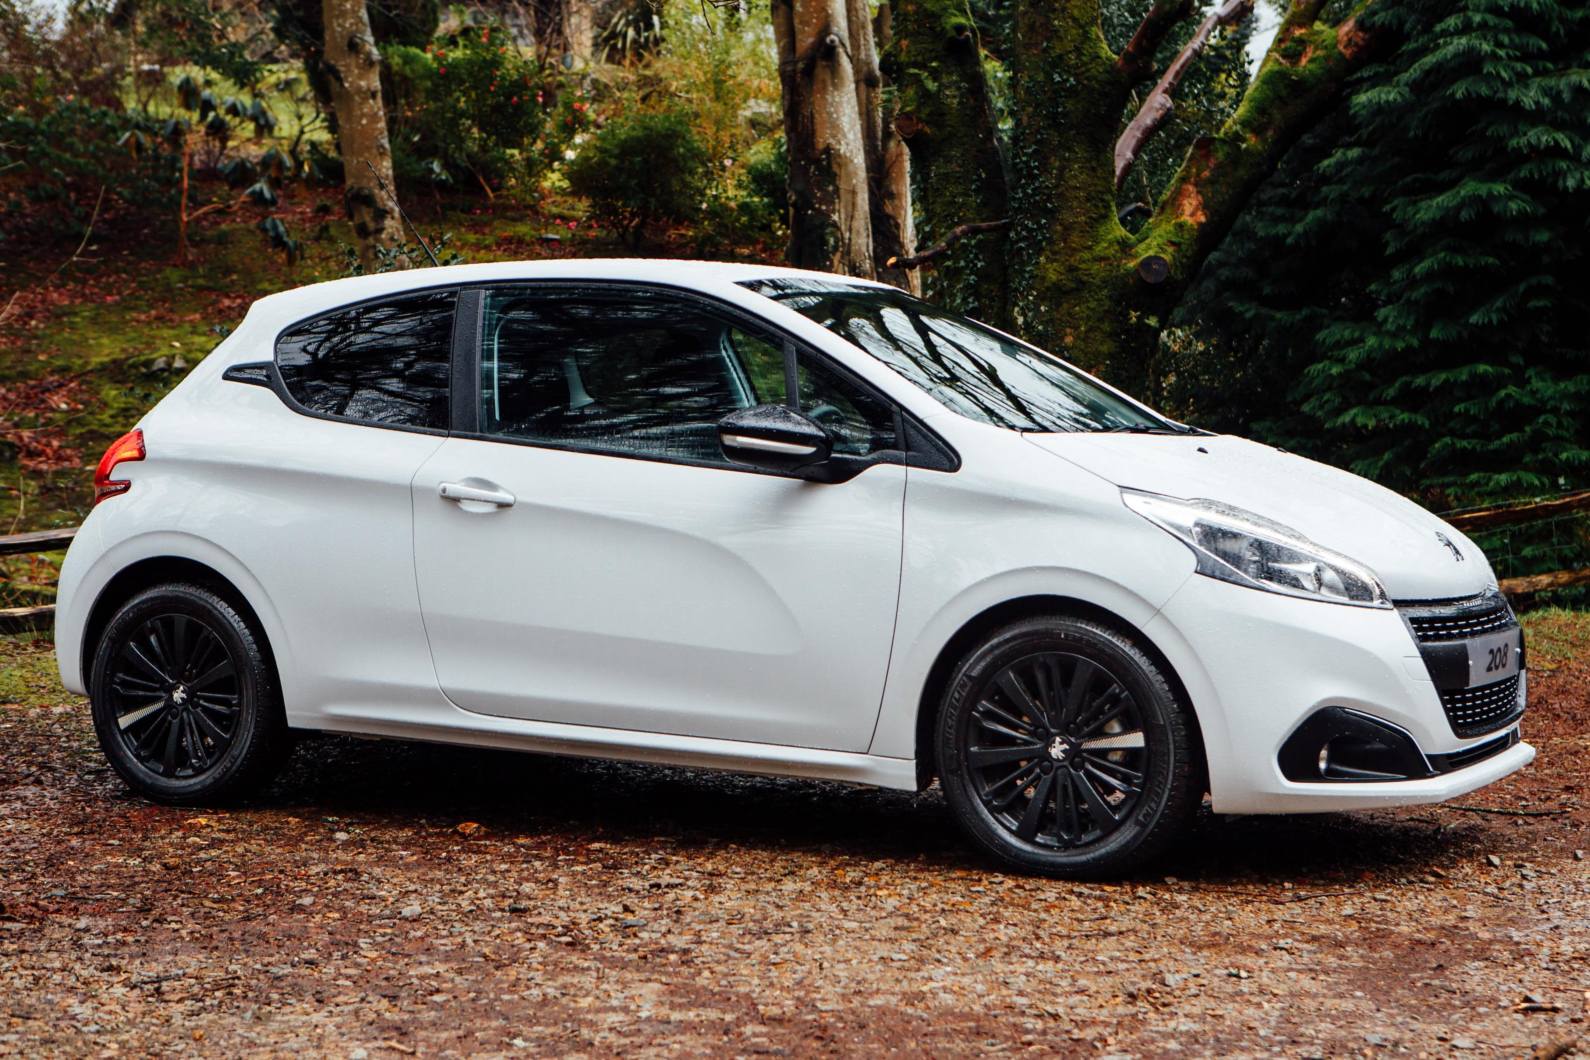 a-detailed-review-of-the-peugeot-208-diesel-hatchback-osv